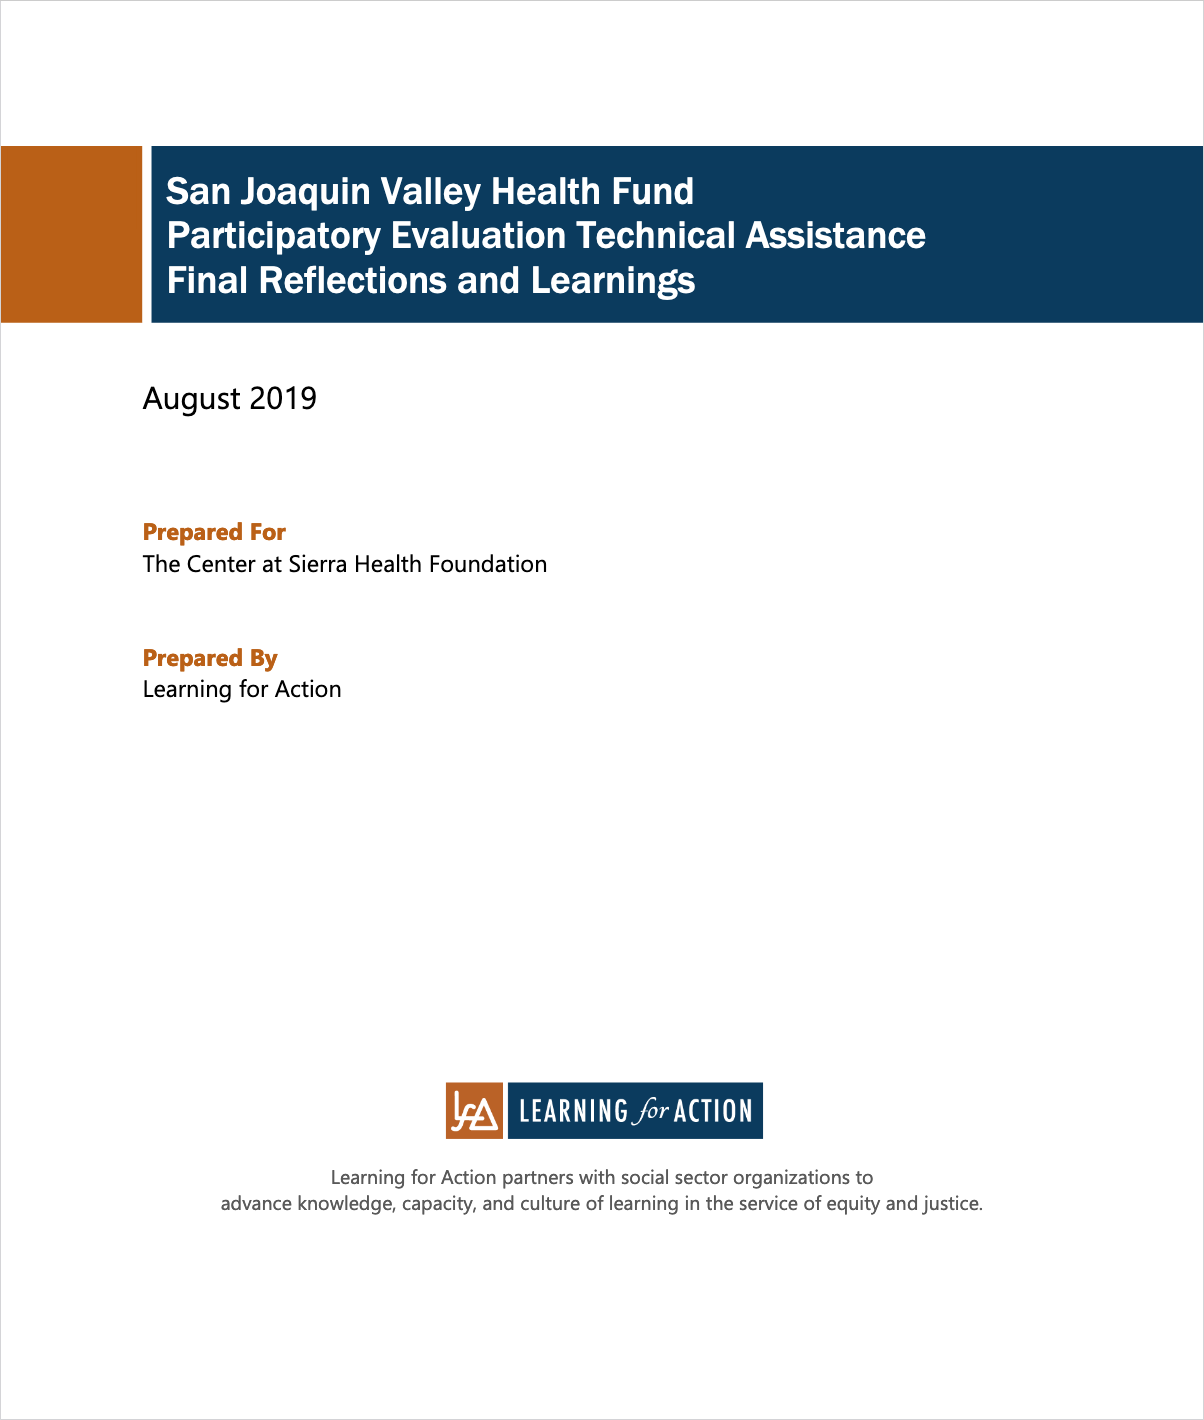 San Joaquin Valley Health Fund Participatory Evaluation Technical Assistance Final Reflections and Learnings (.pdf)